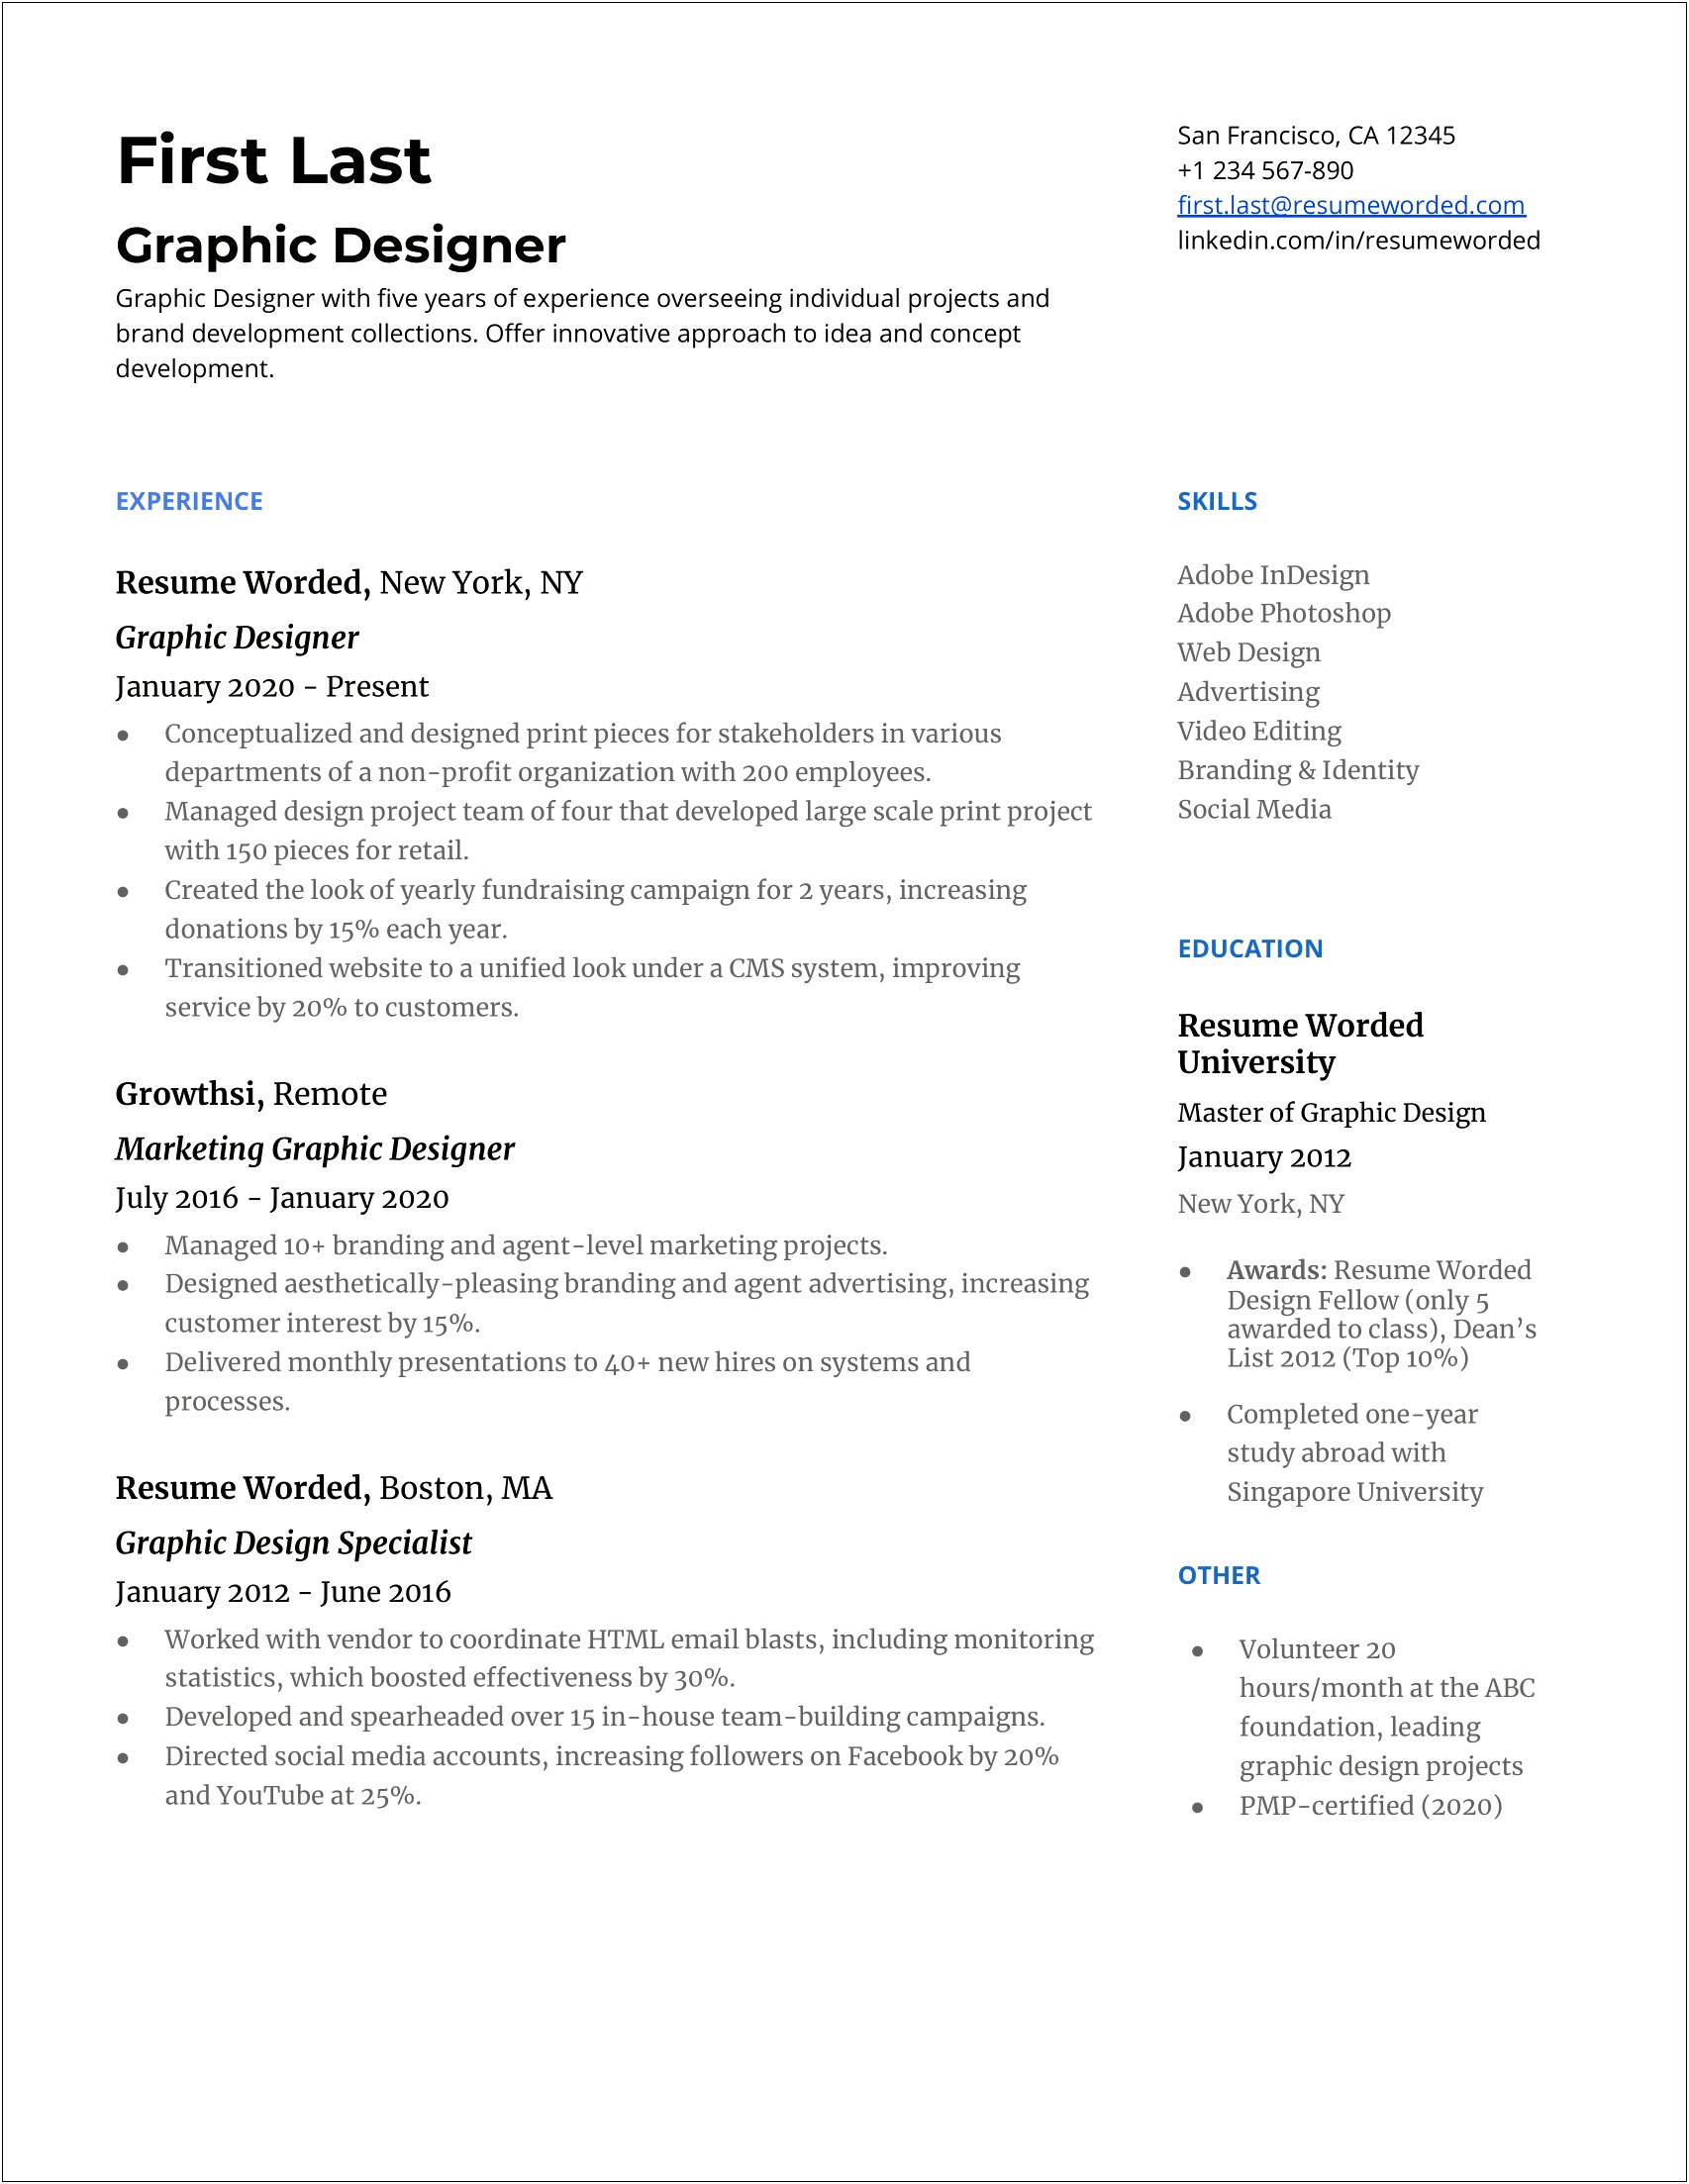 Resume That Highlights Courses Taken Template